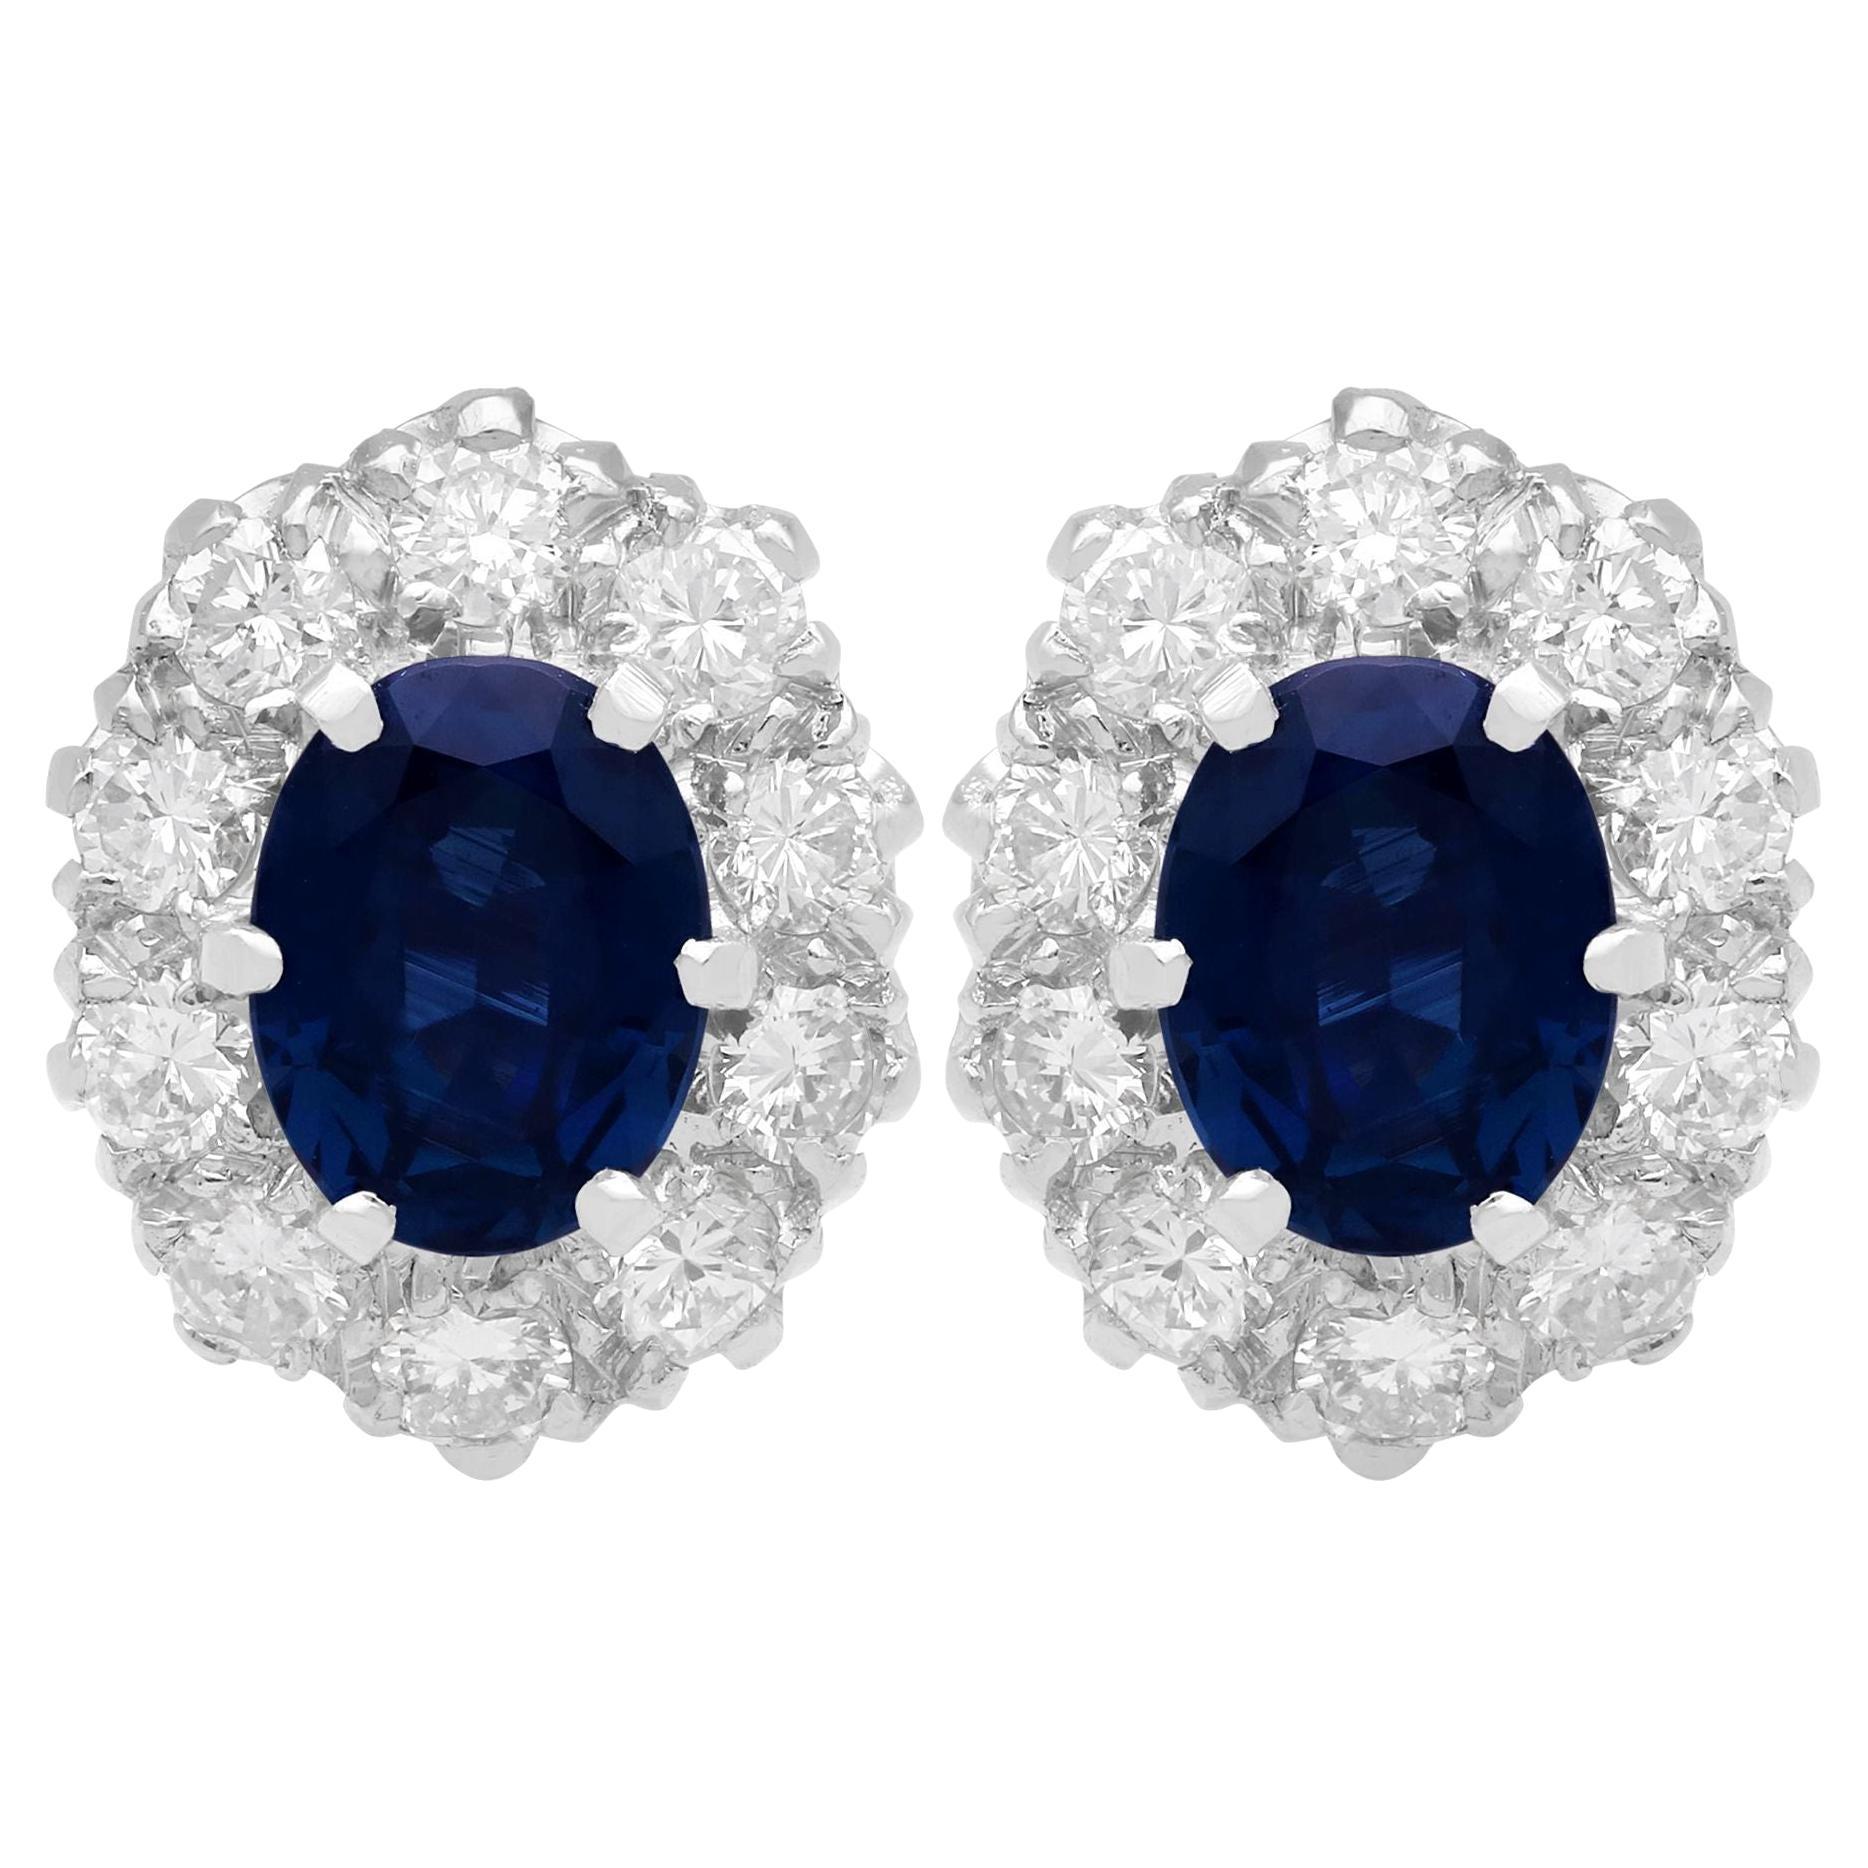 Vintage 2.75 Carat Sapphire and 1.00 Carat Diamond Yellow Gold Cluster Earrings For Sale